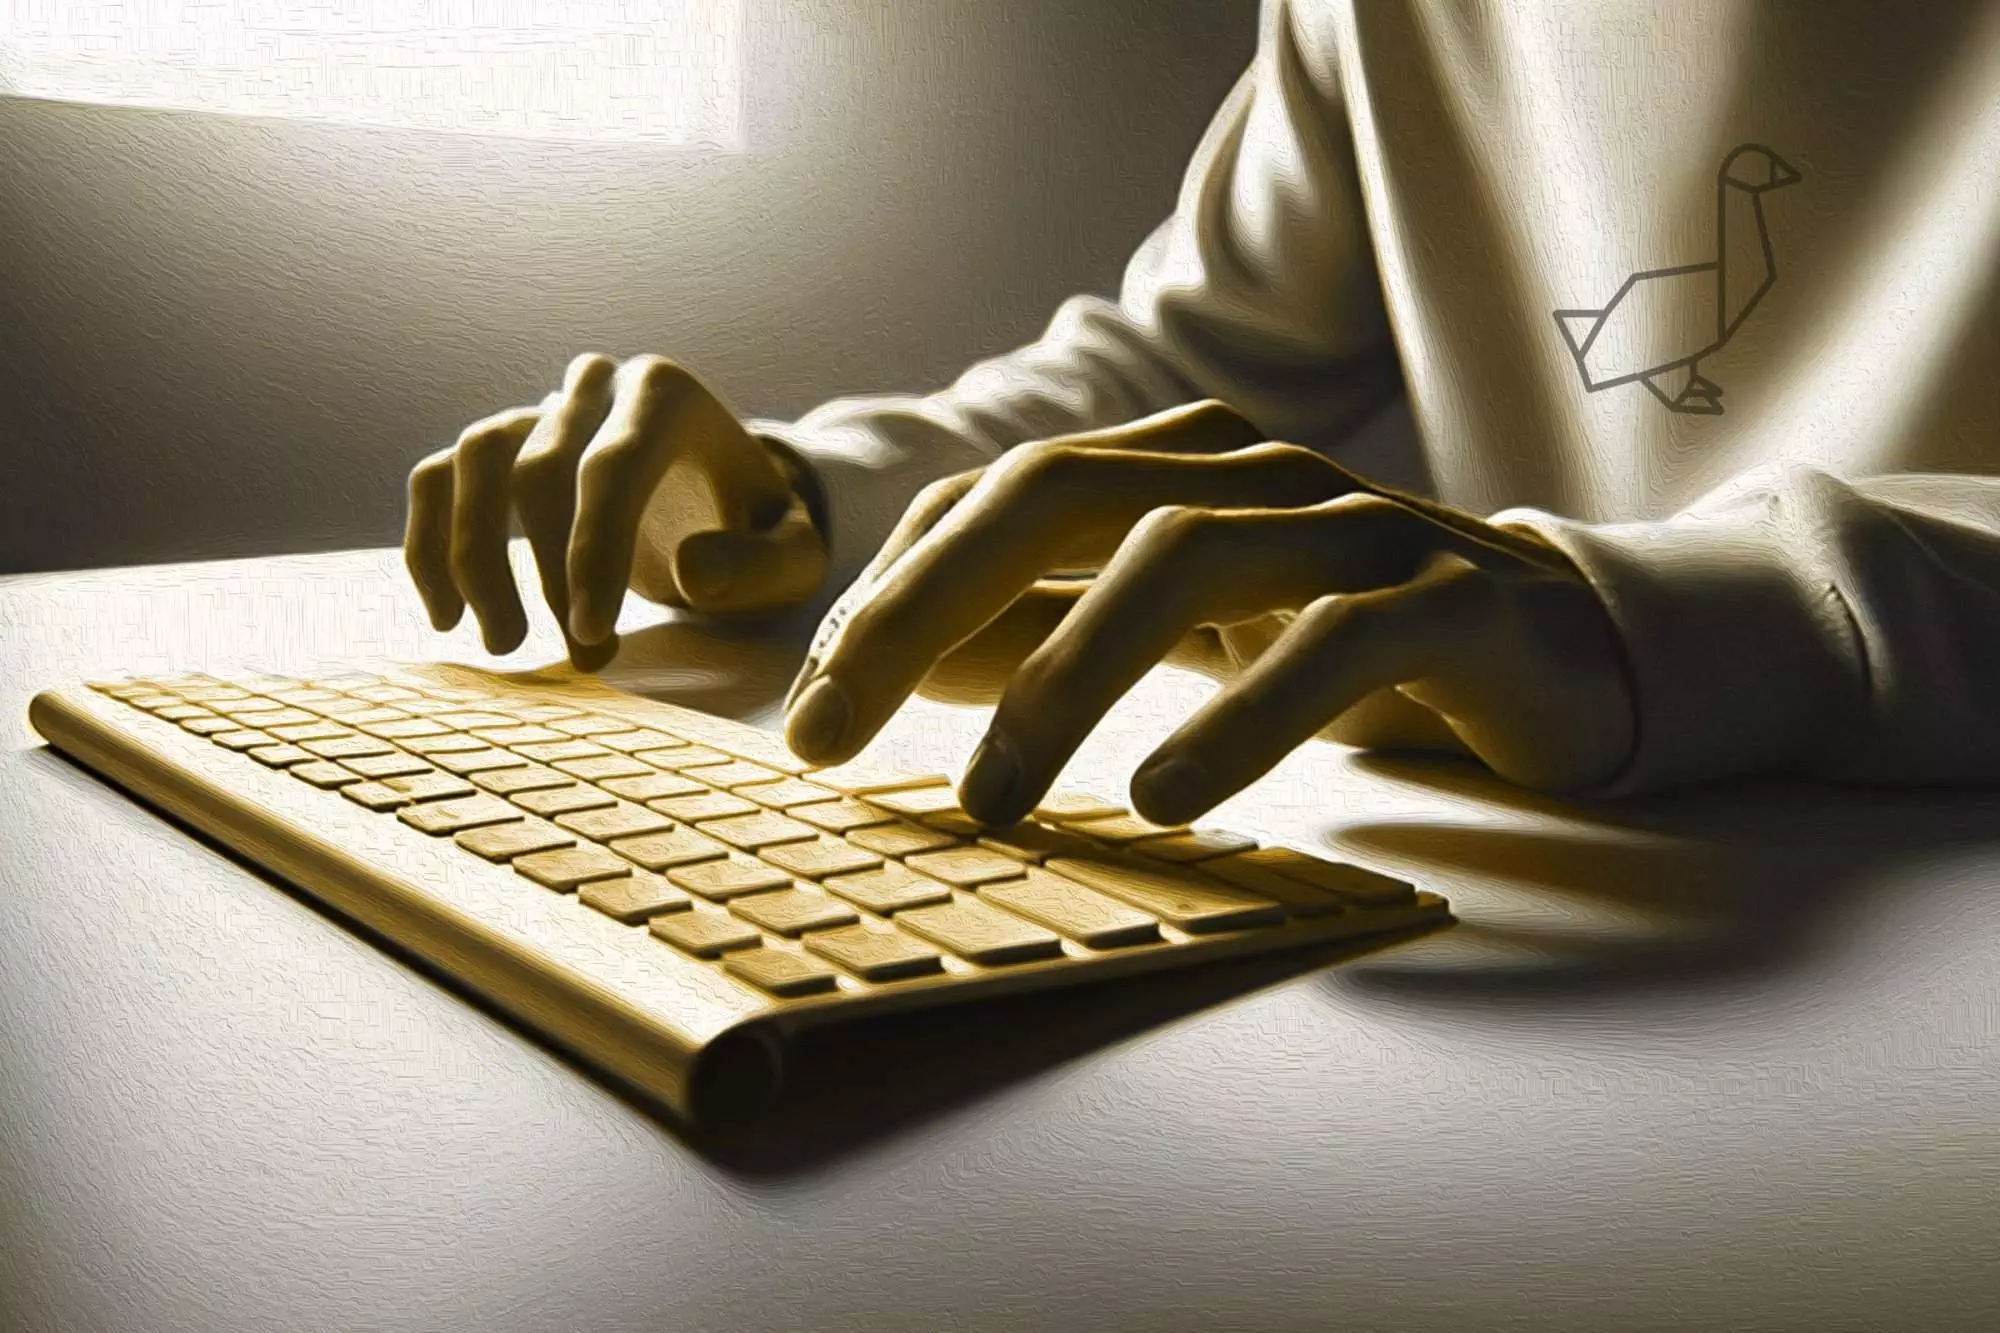 Hands typing on a sleek keyboard in a sunlit room, symbolizing the process of creating a writing style guide.